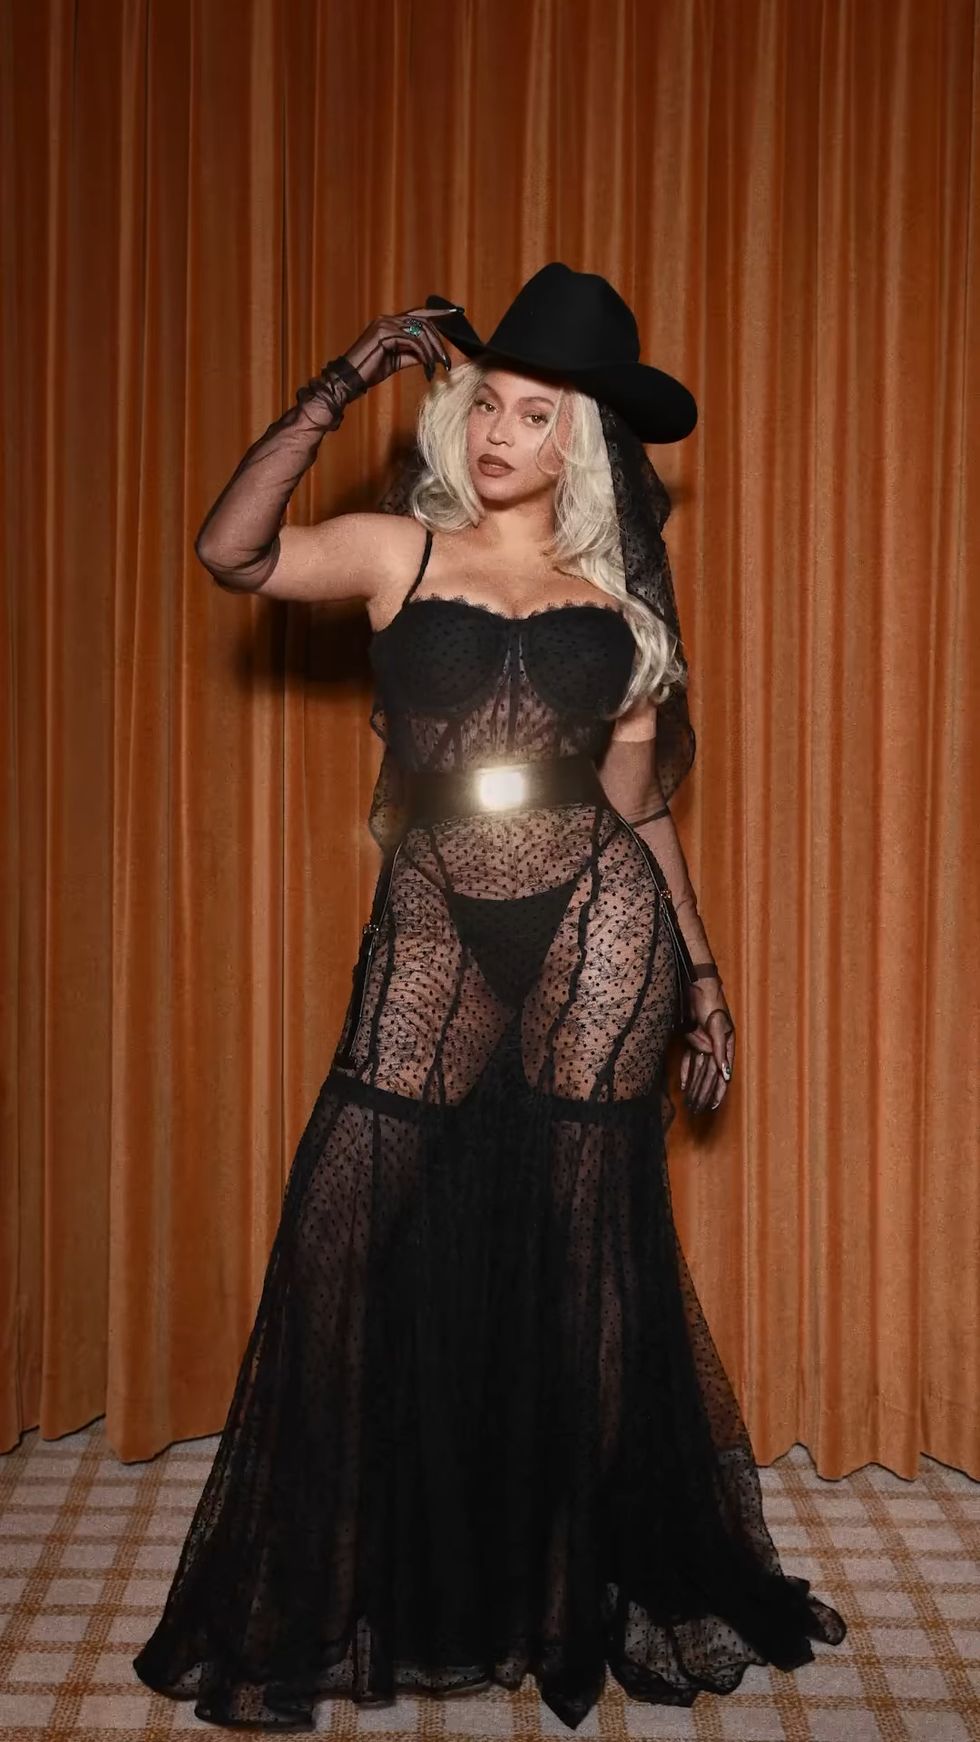 Beyoncé Rides Into Her Cowgirl Era in a Romantic See-Through Lace Dress